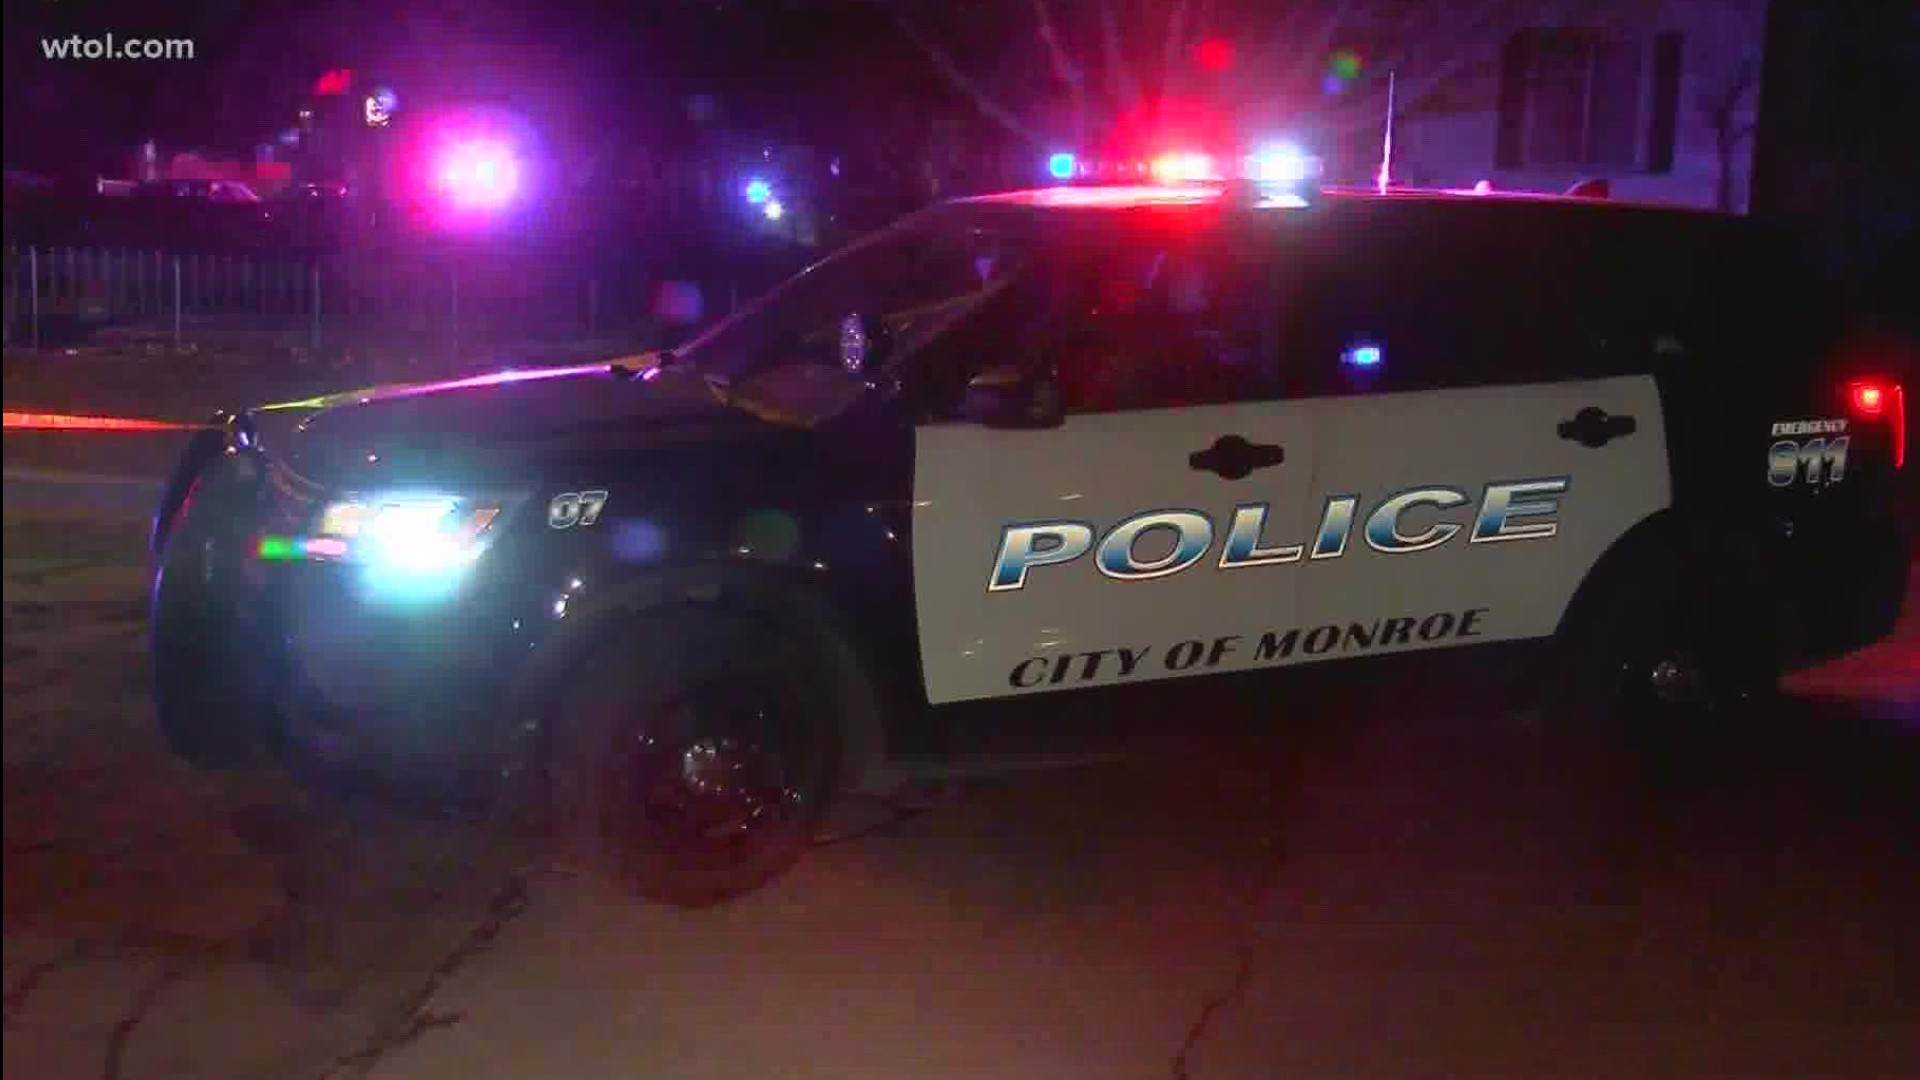 Neighbors say the gunshots sounded unlike any gunshots they've heard before. Evidence at the scene led Monroe police to describe the weapon as a "high-powered rifle"